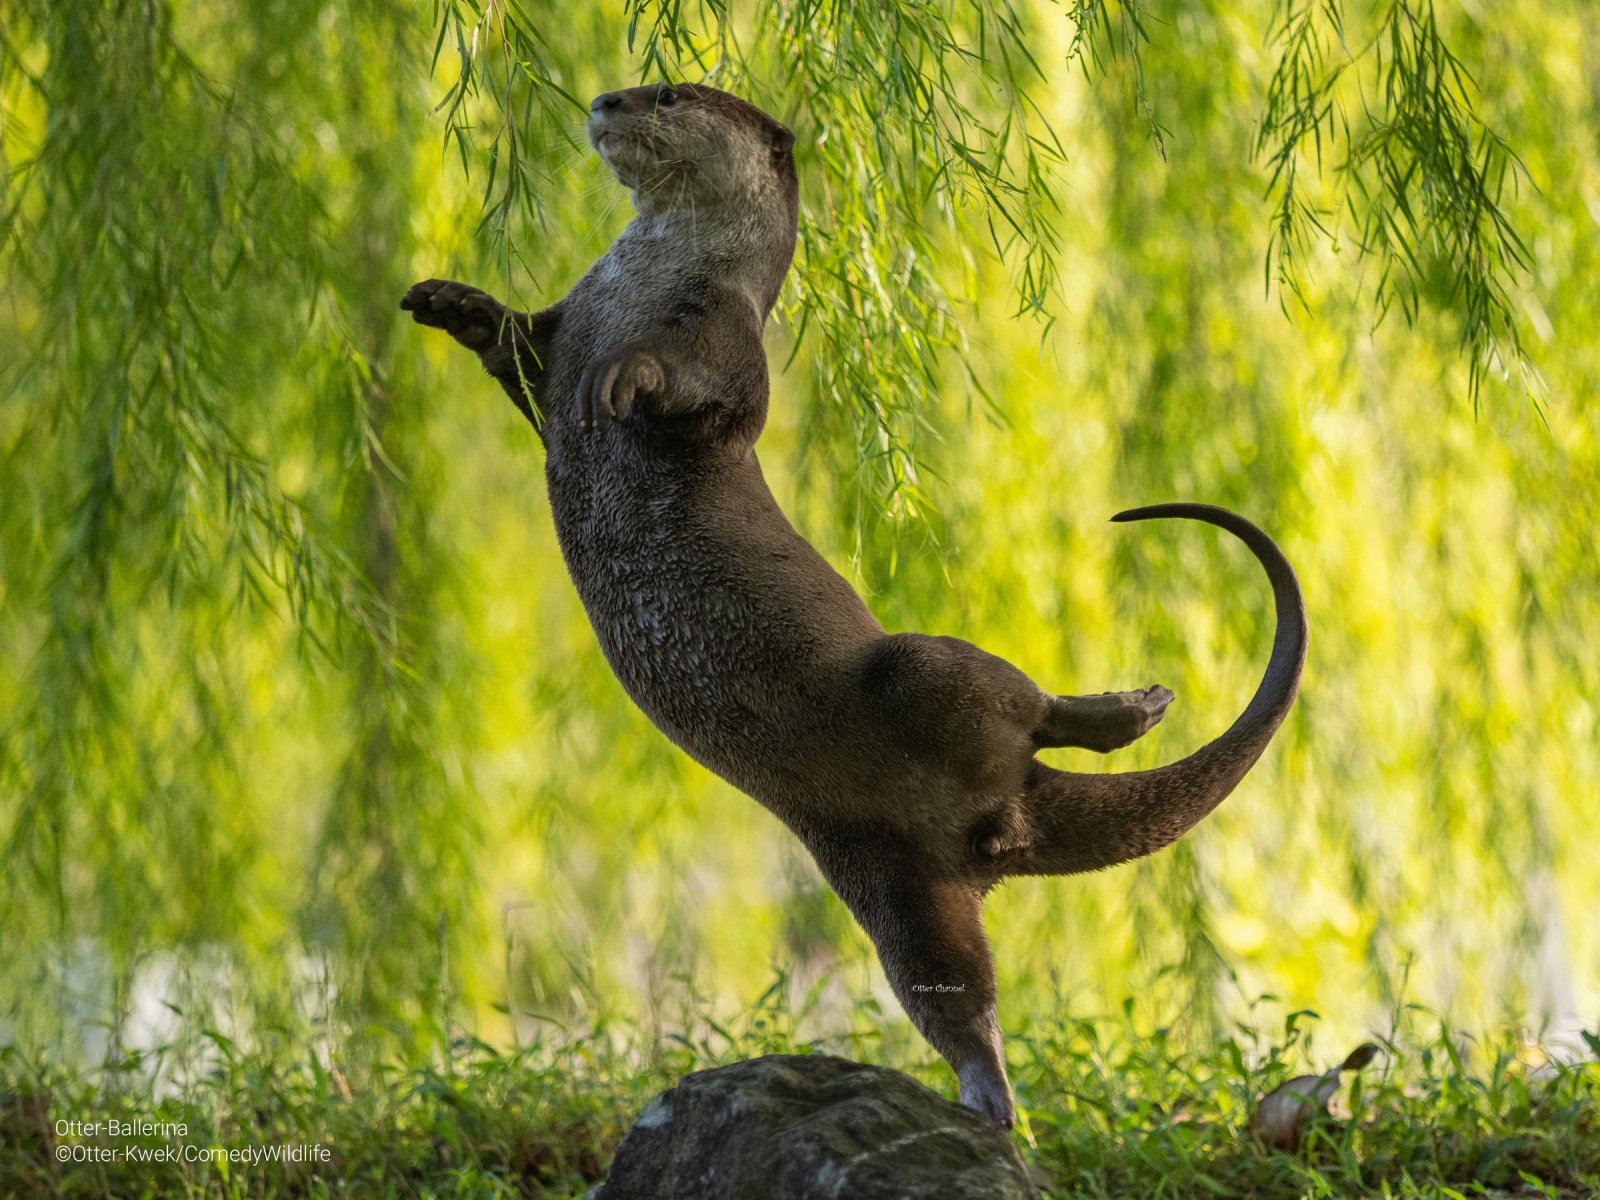 An otter in a ballerina position with a green leafy background